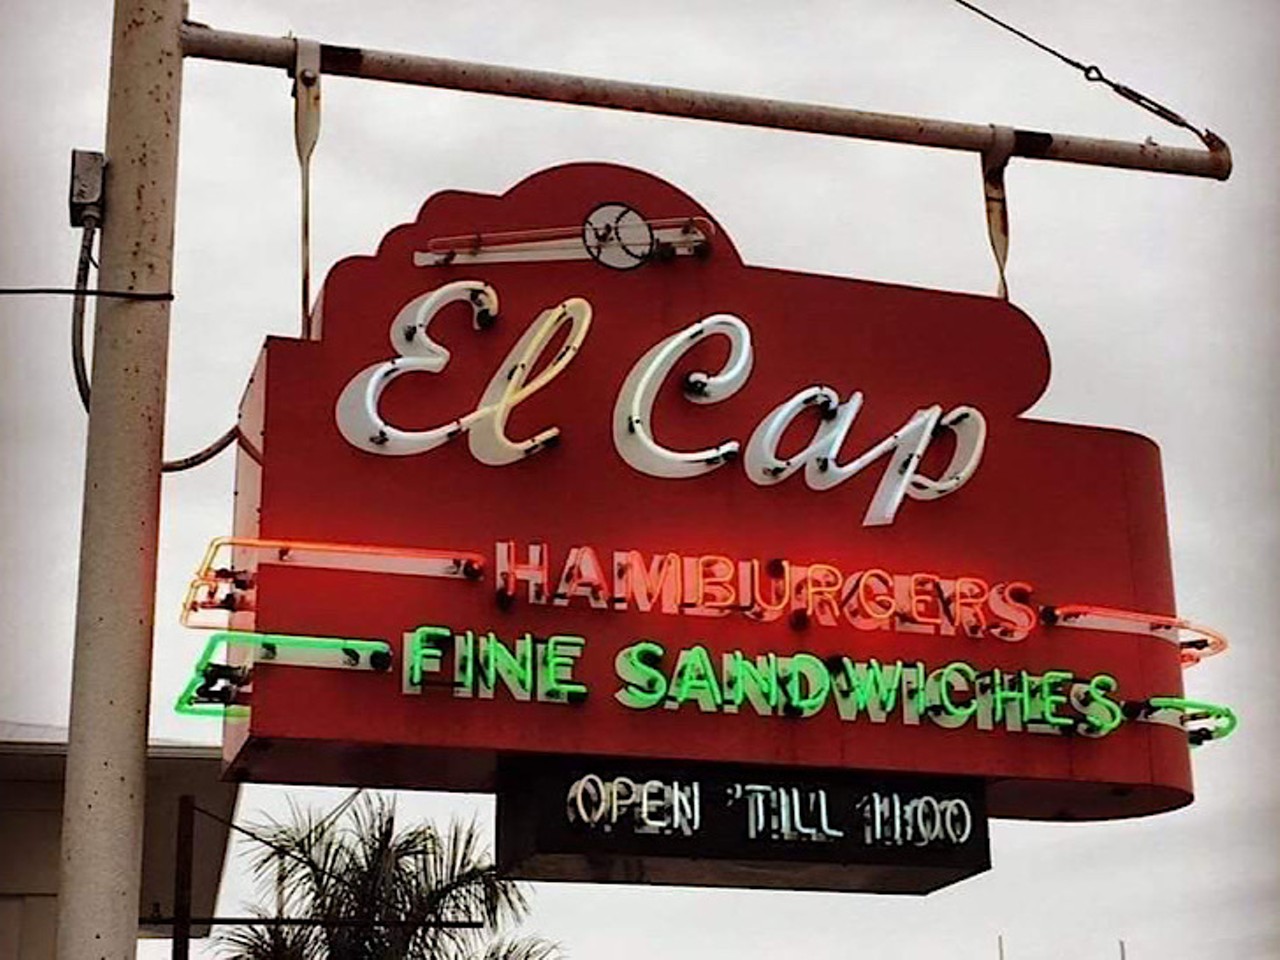 El Cap
500 4th St. N. St. Petersburg, FL
The diner-style restaurant offers a variety of foods but mostly known for their burgers and fries. Other plates include their signature El Cap Gridiron grilled cheese sandwich, chilli, along with weekly specials.
Photo via El Cap/Facebook